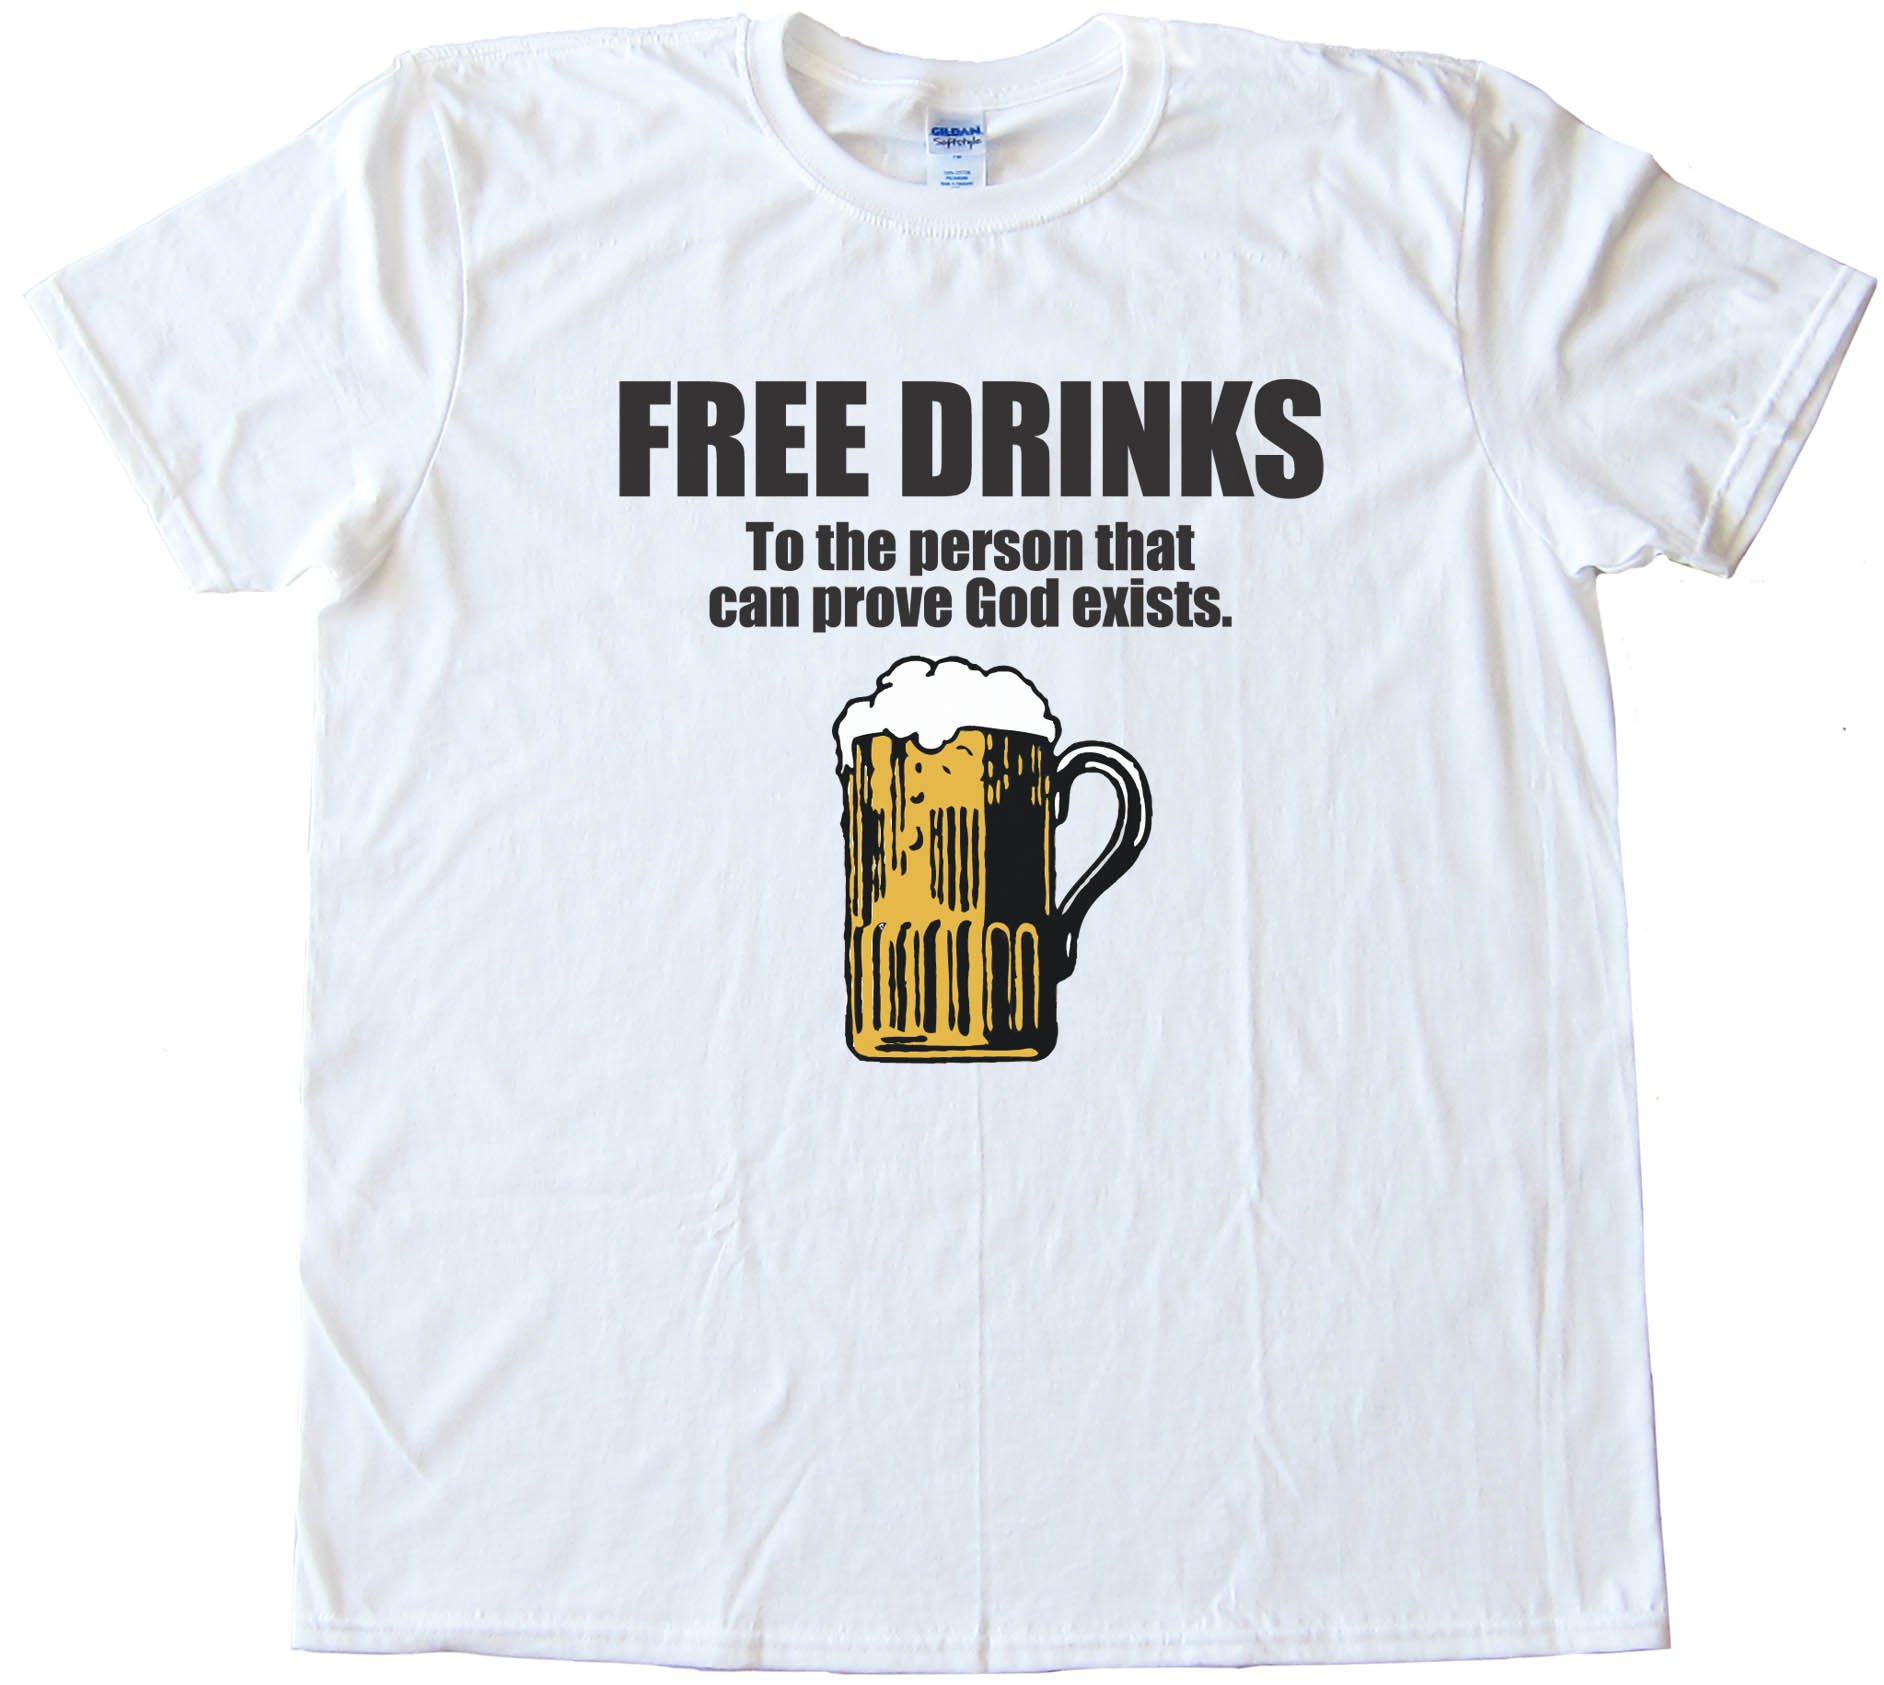 Free Drinks To The Person That Can Prove God Exists -Tee Shirt